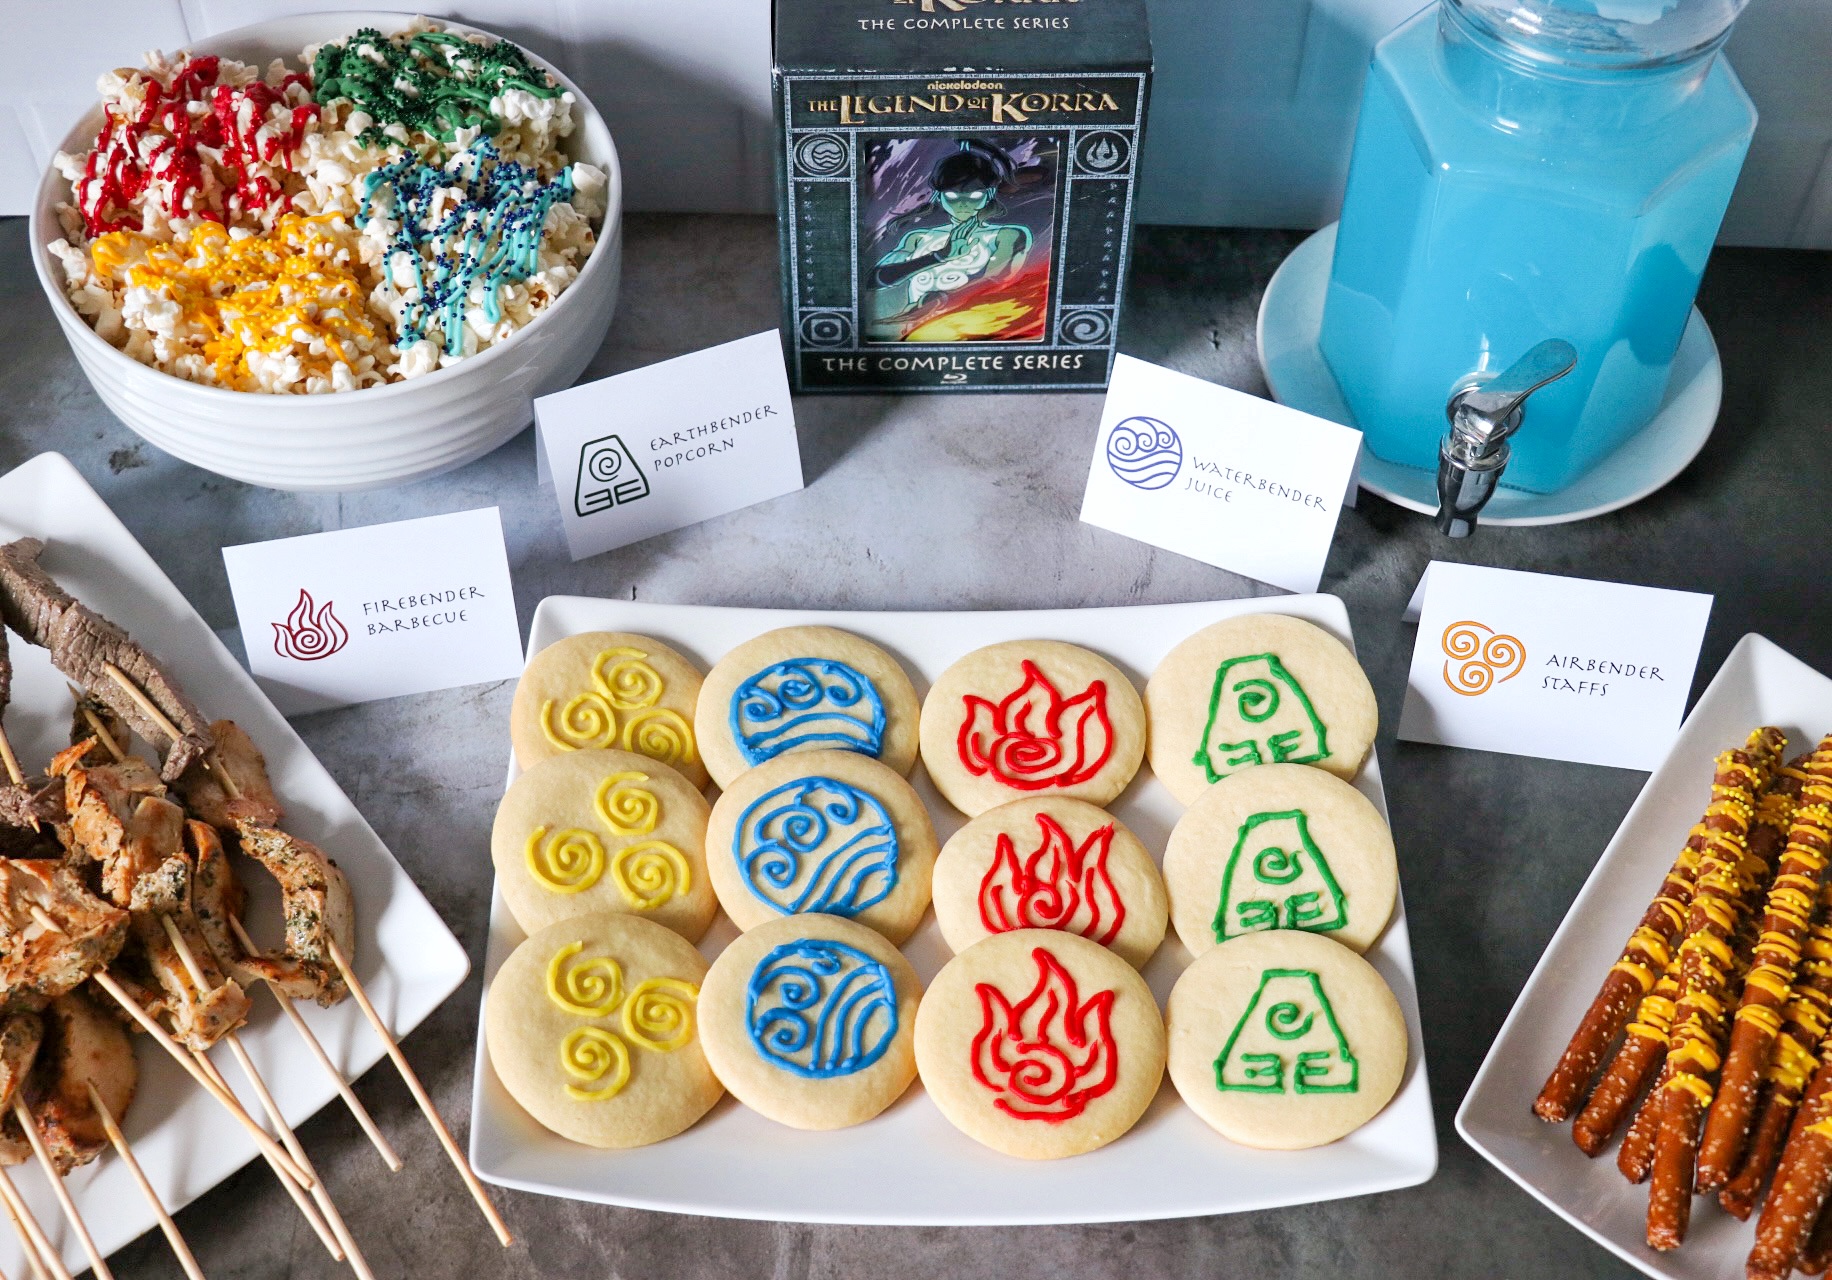 Avatar the Last Airbender party ideas